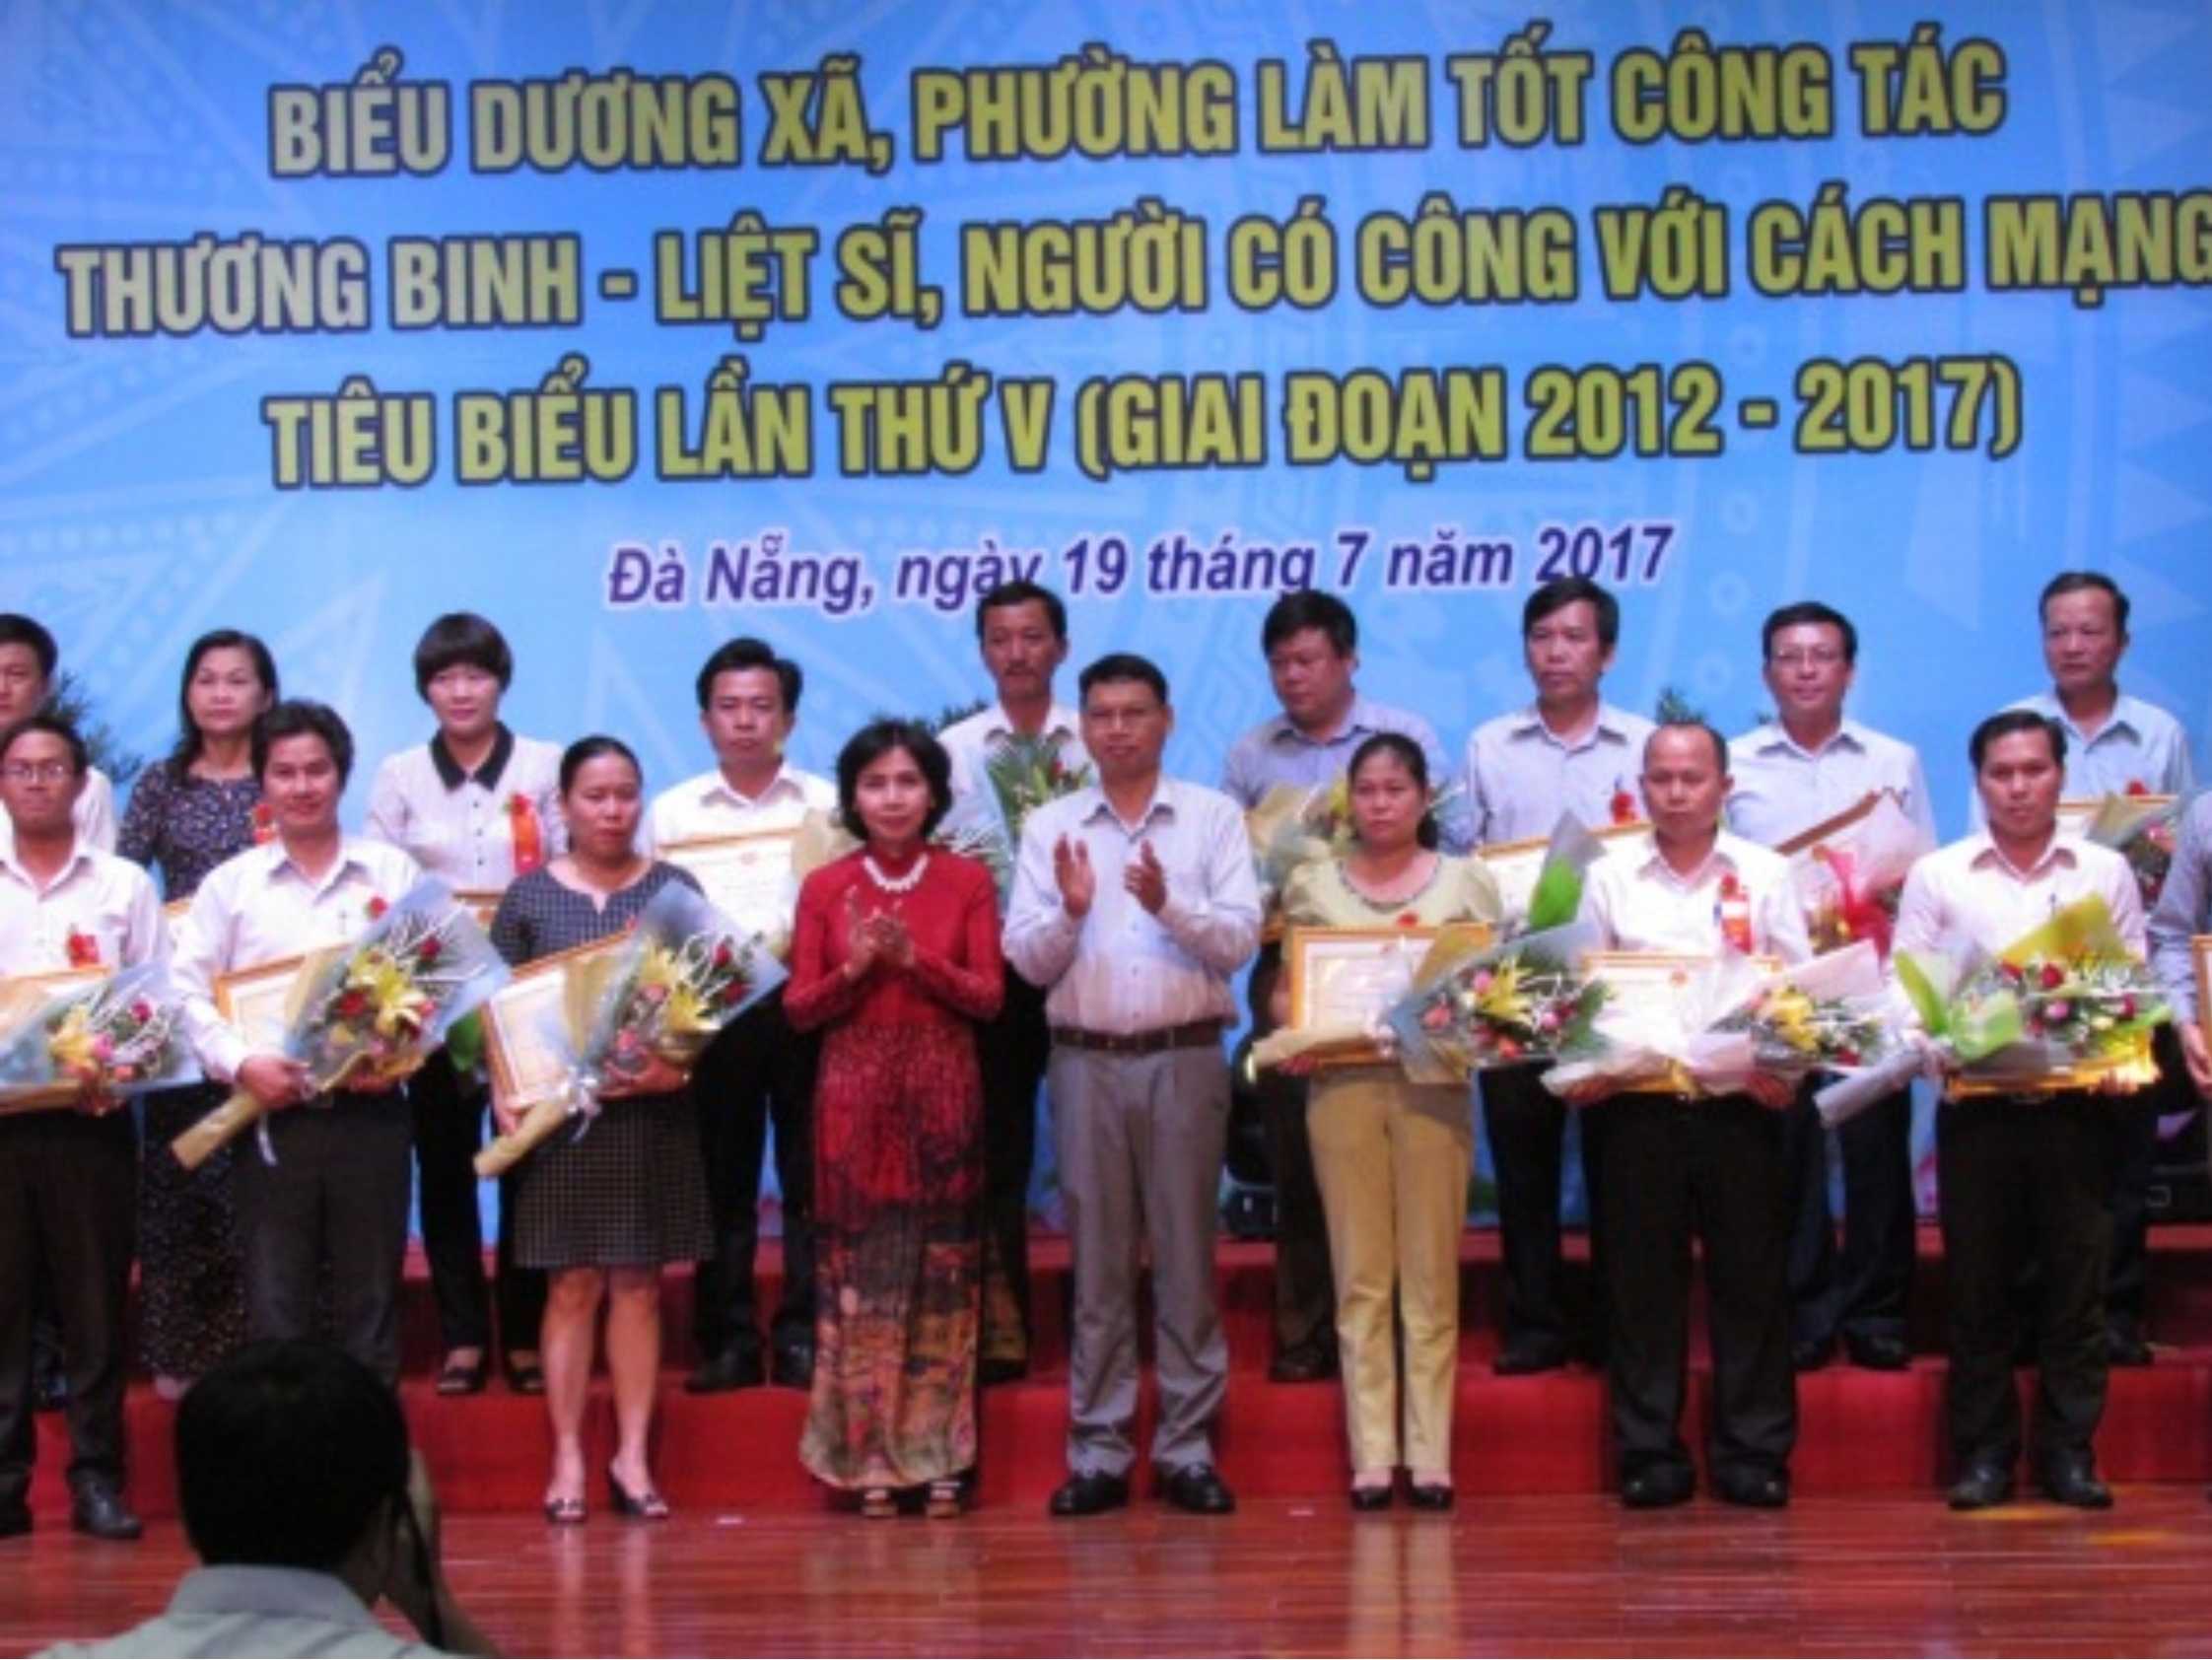 Vice Chairman Minh (front row, 4th right) and the honourees